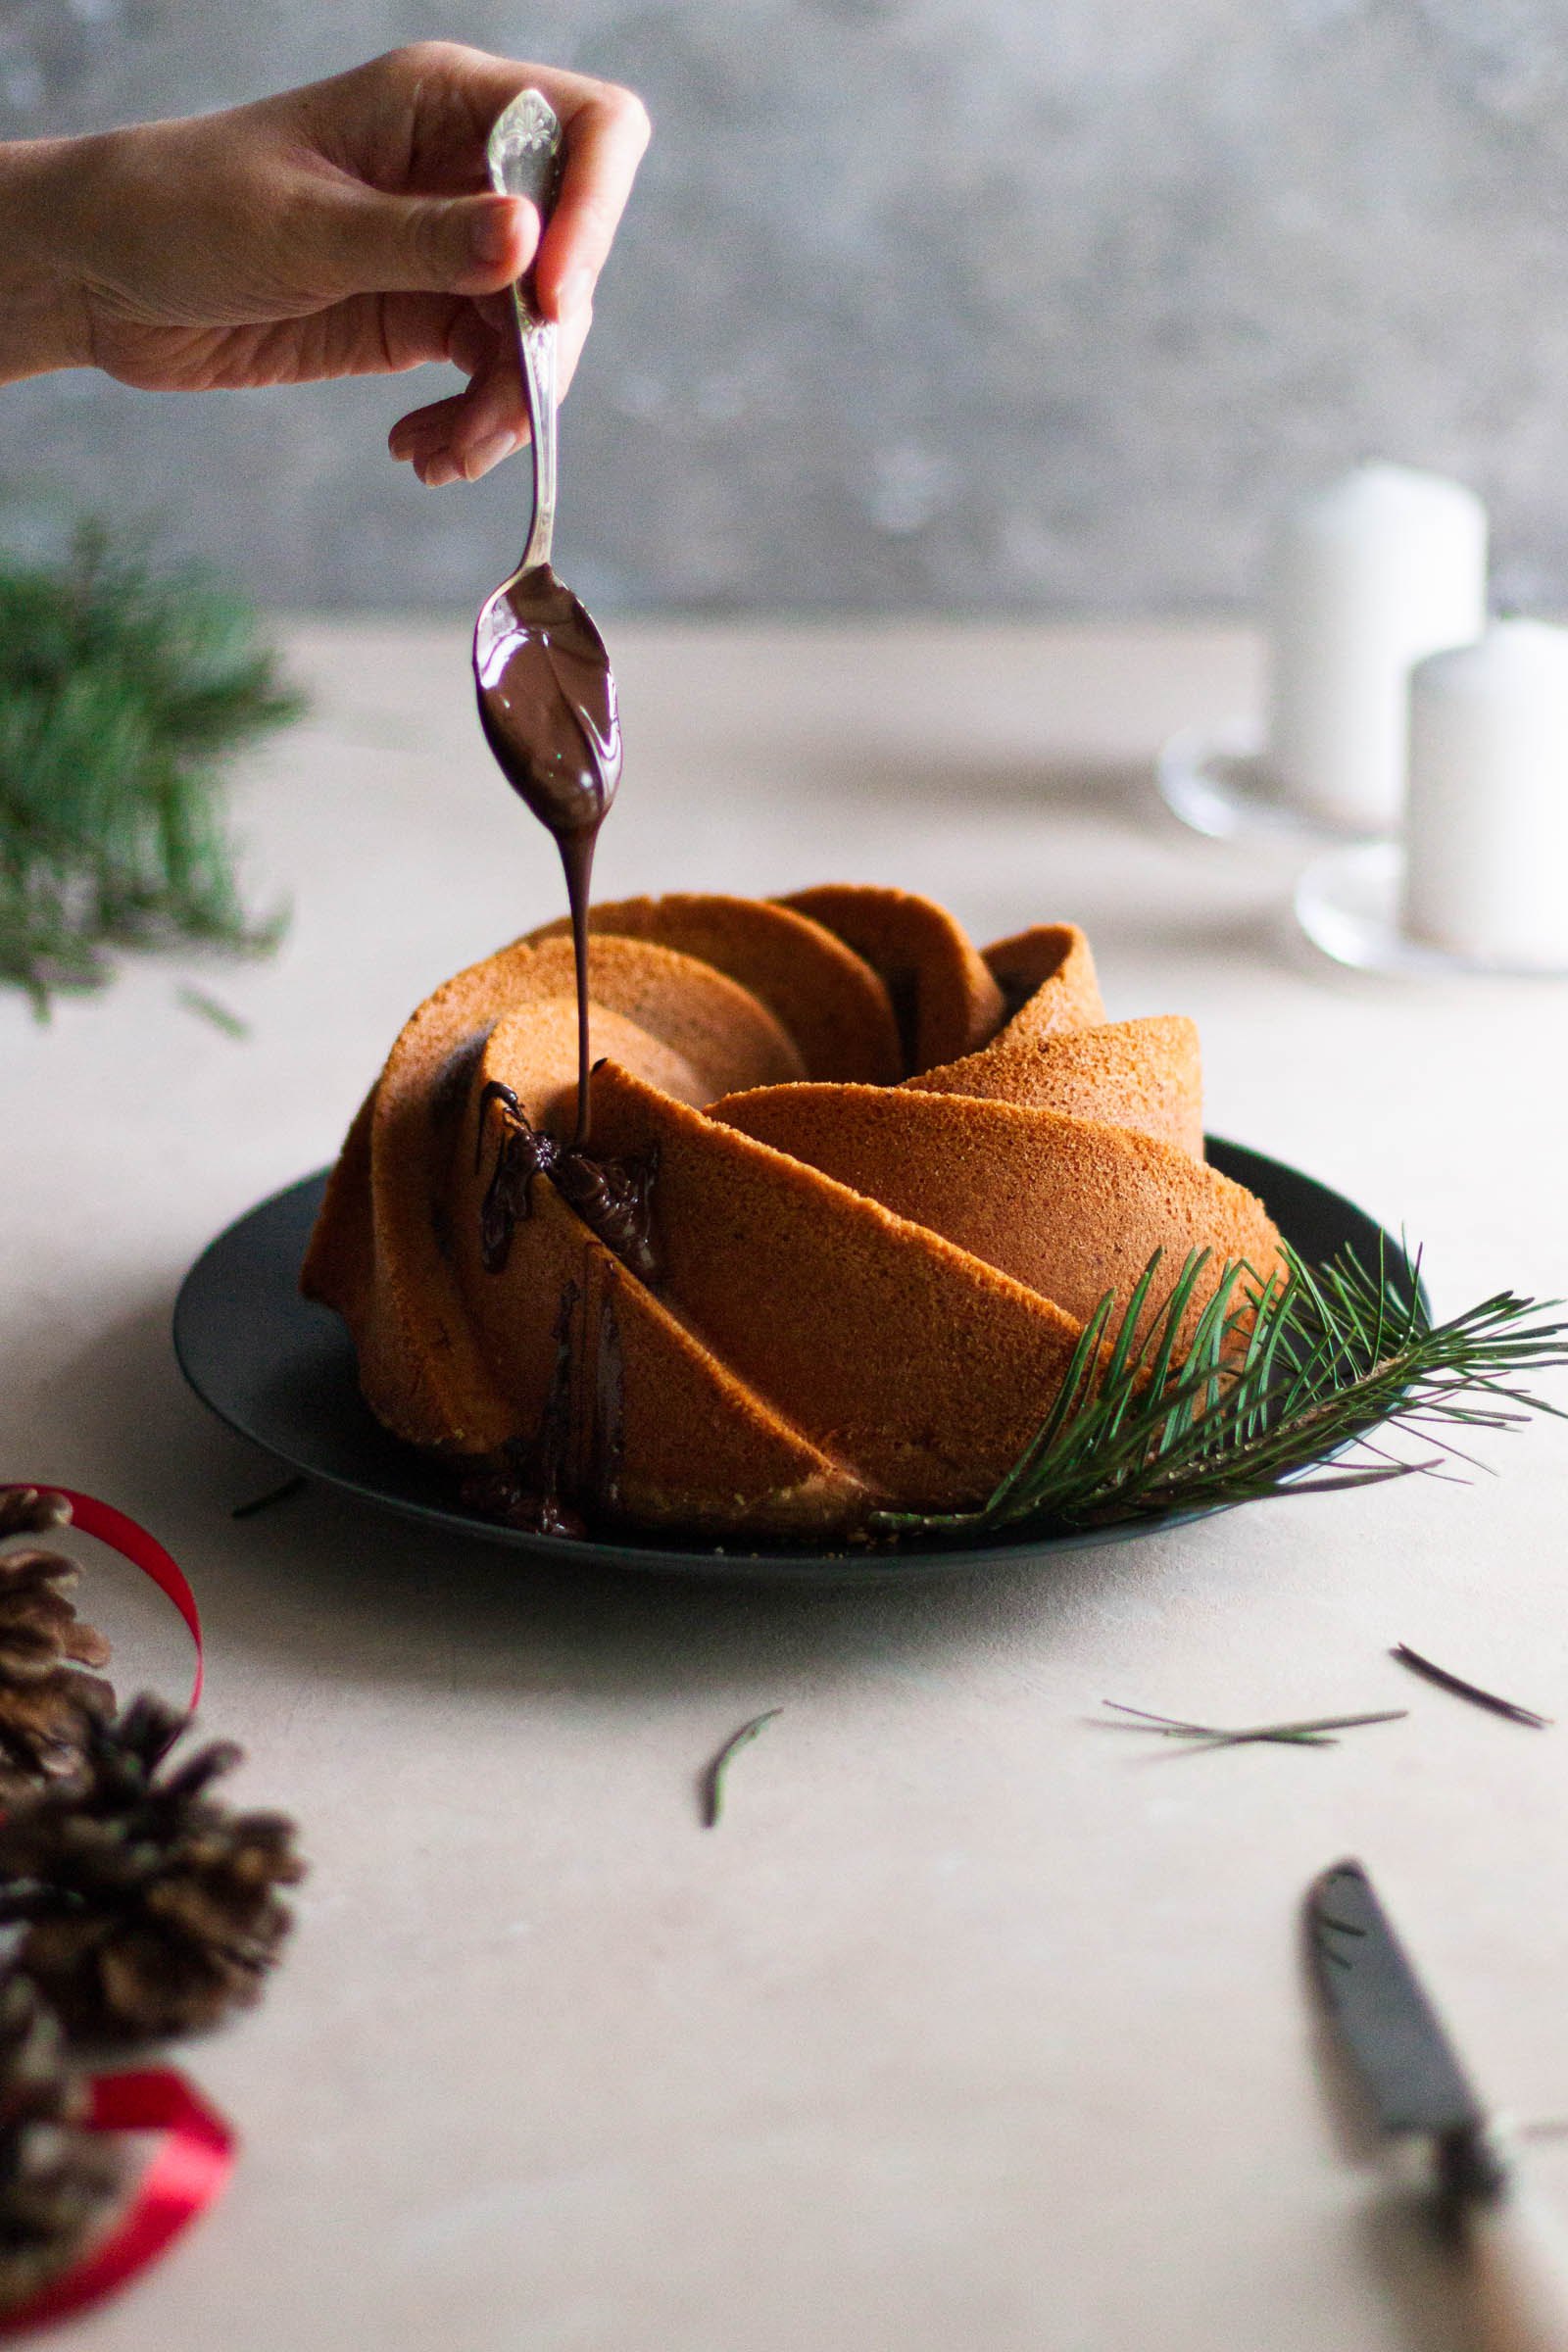 Read more about the article Simple European Style Bundt Cake from Scratch